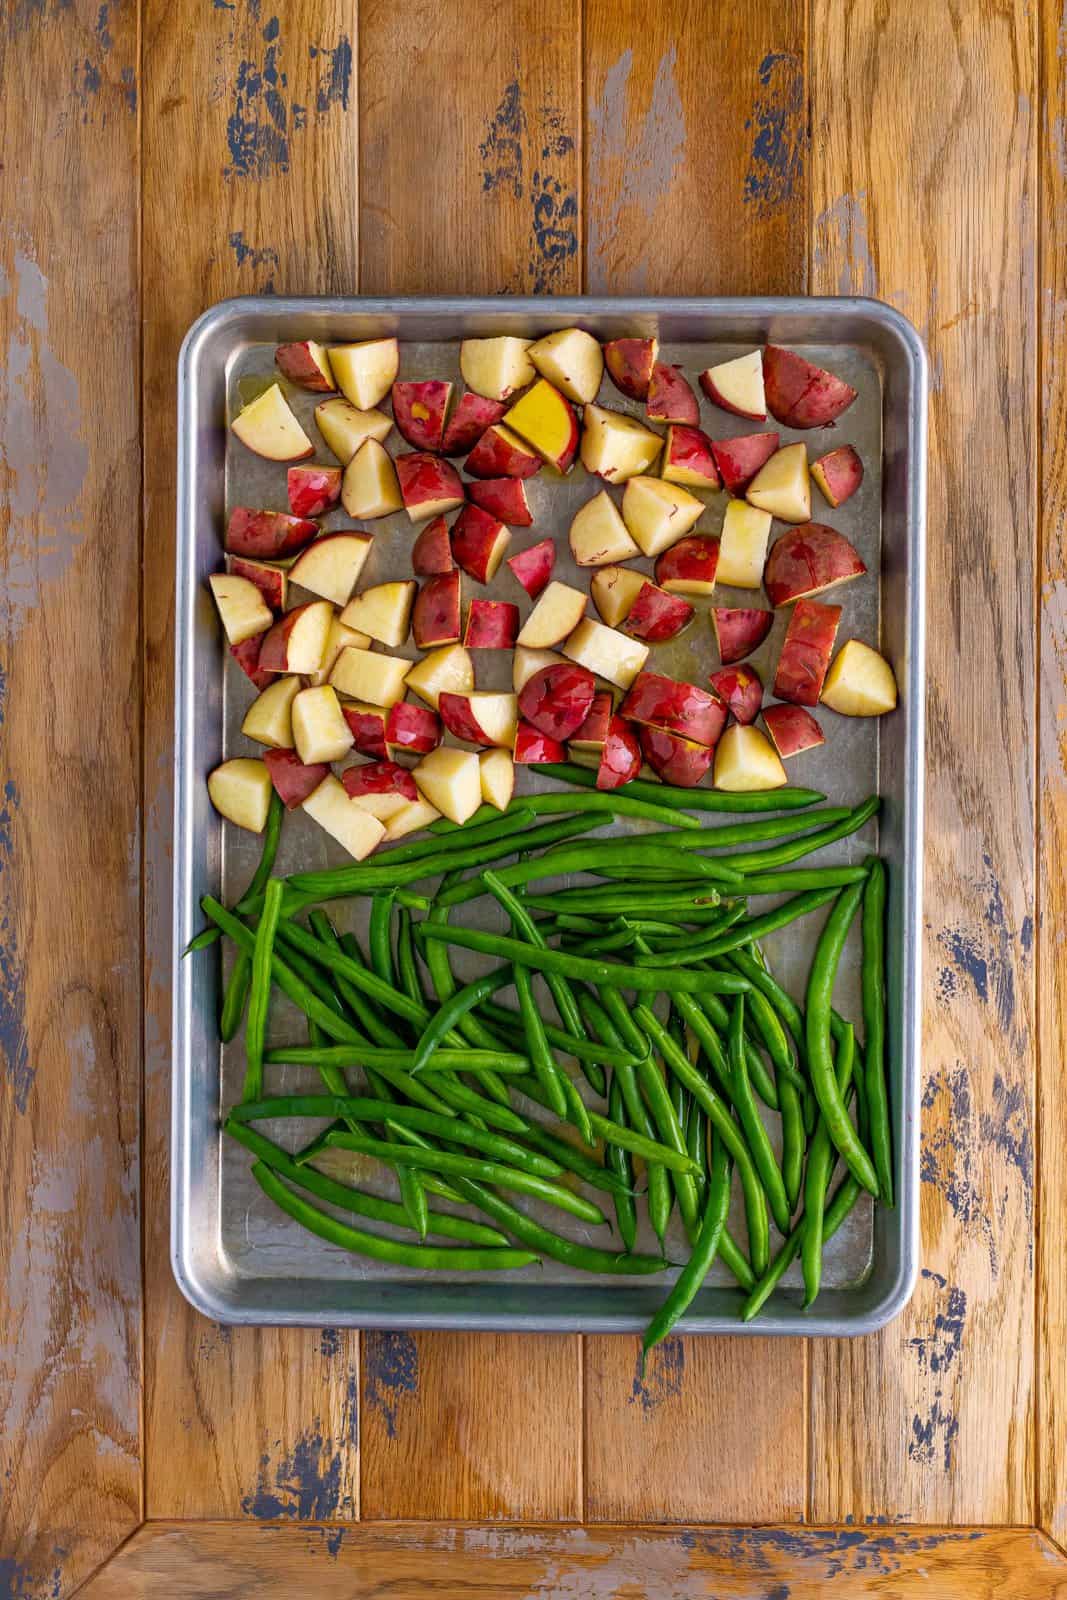 A sheet pan with green beans on half and cut up potatoes on the other.